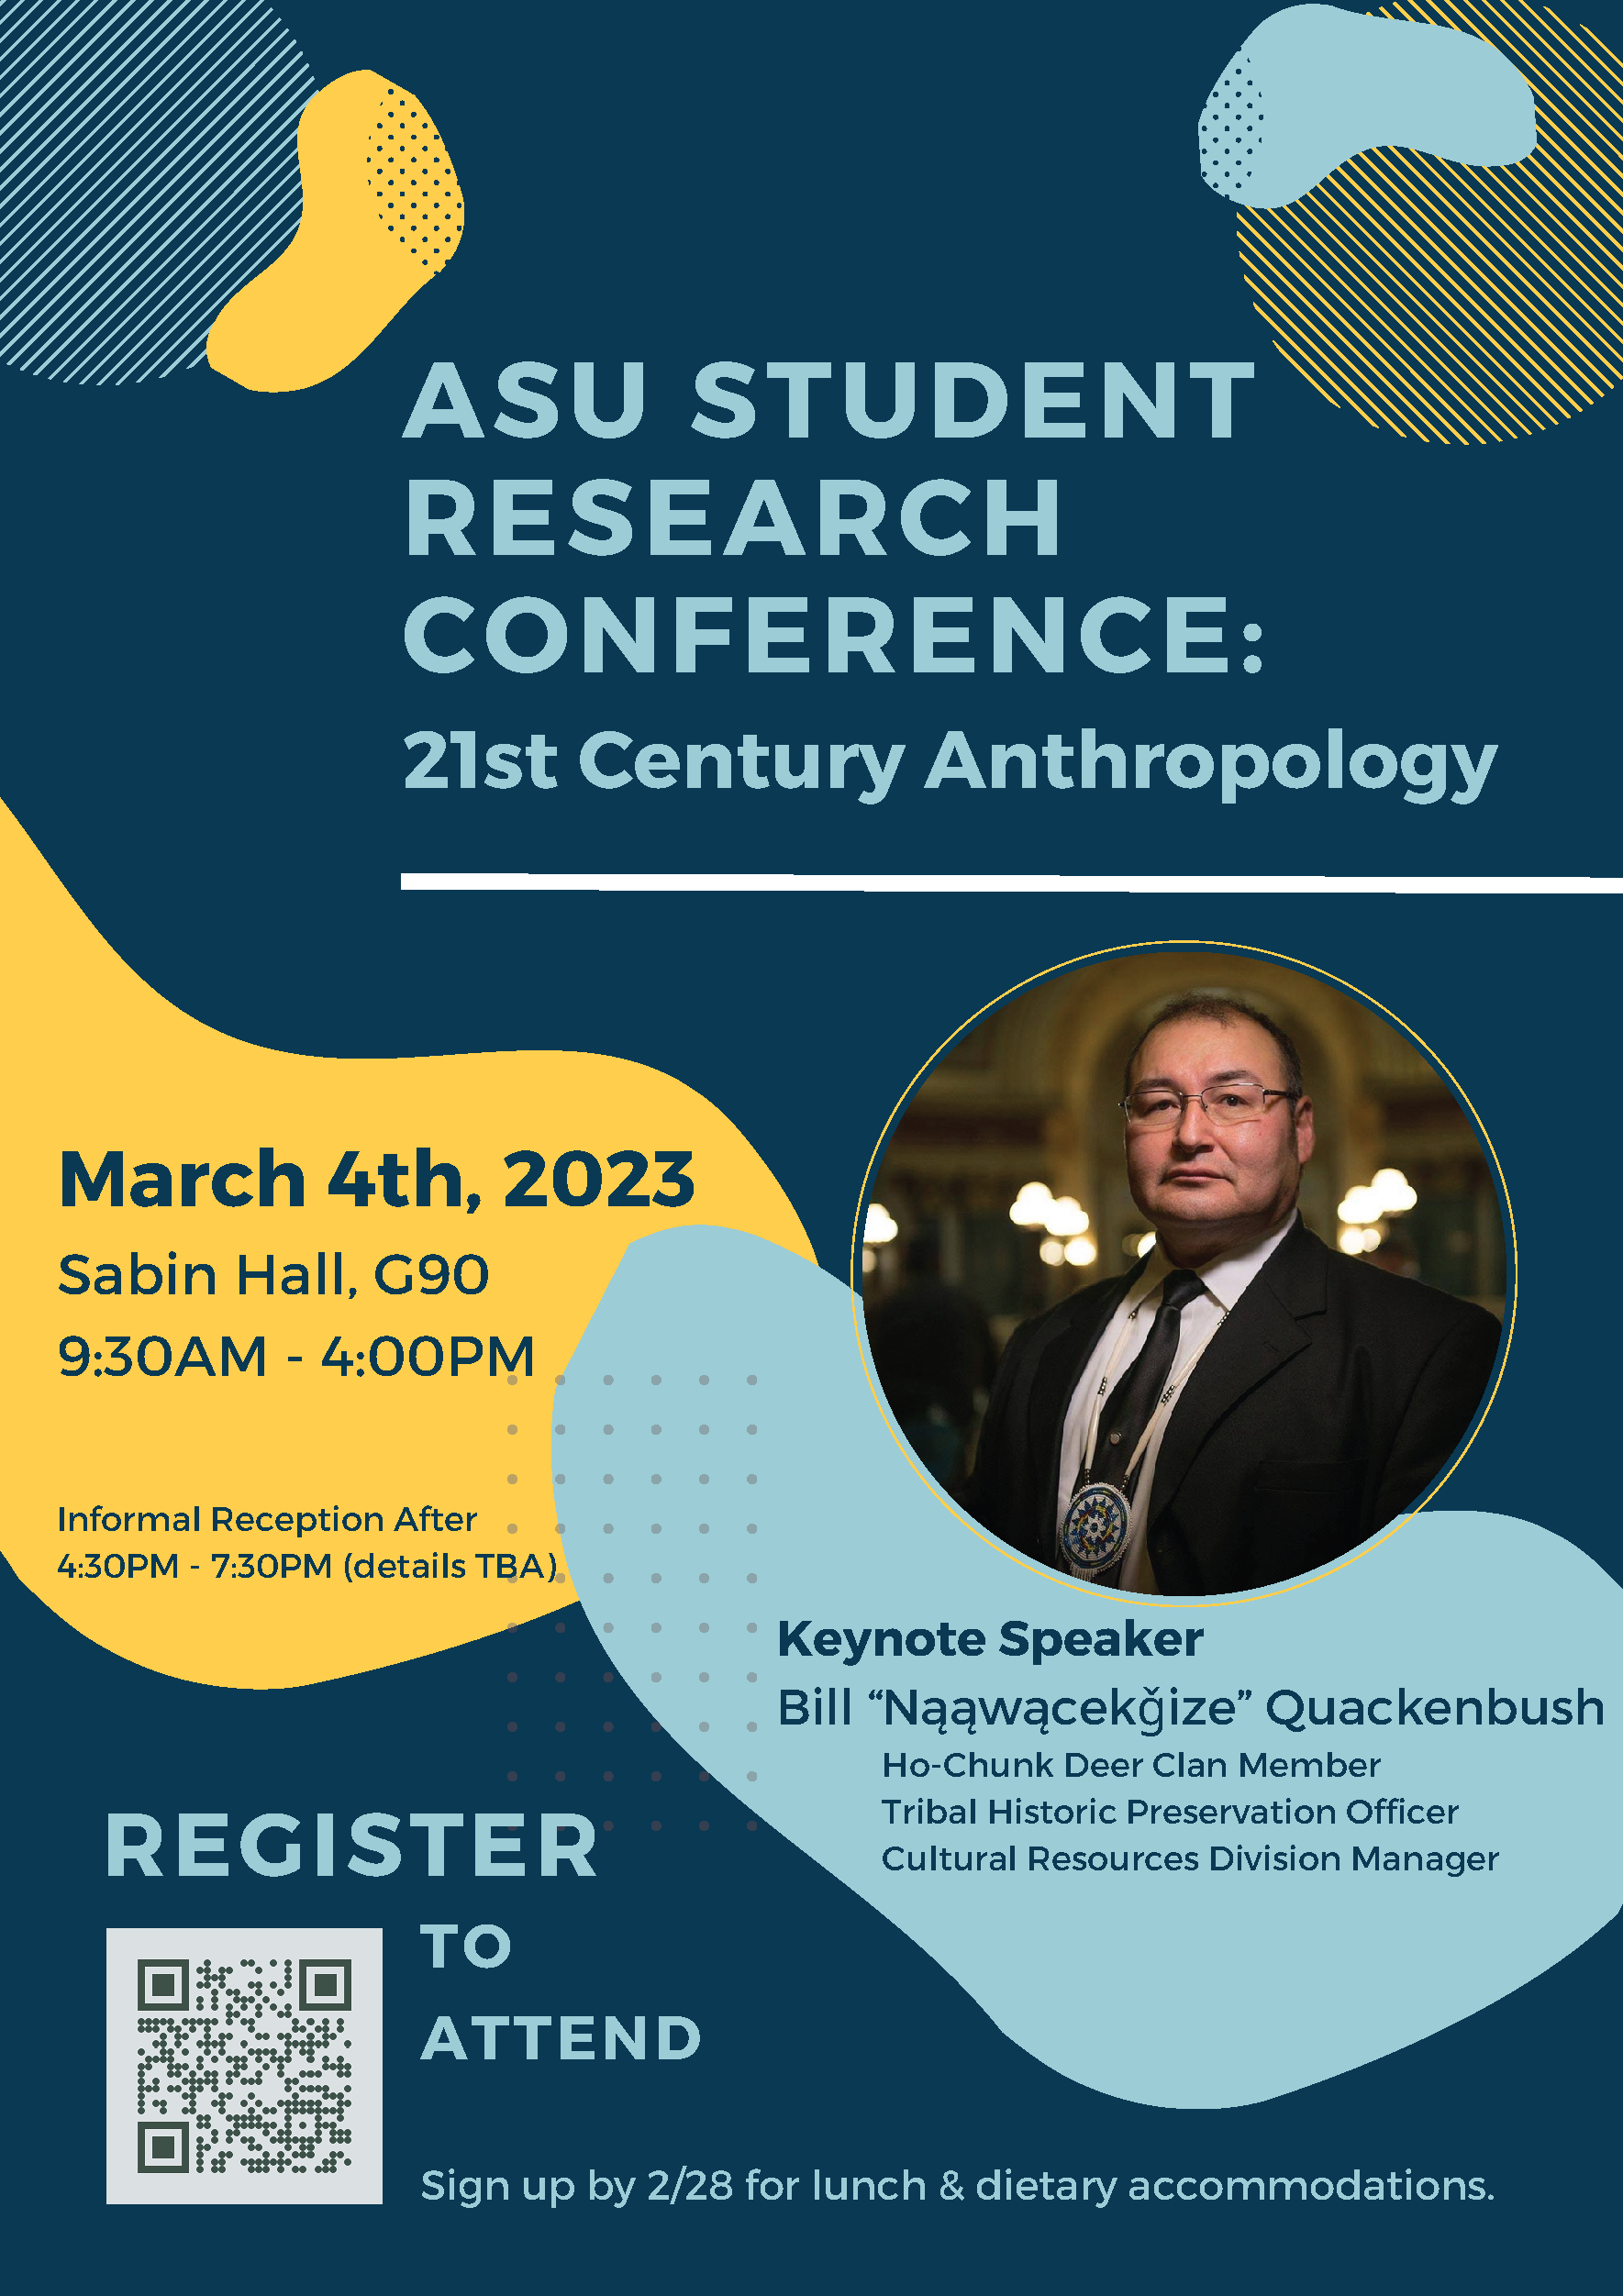 ASU Student Research Conference 21st Century Anthropology Anthropology